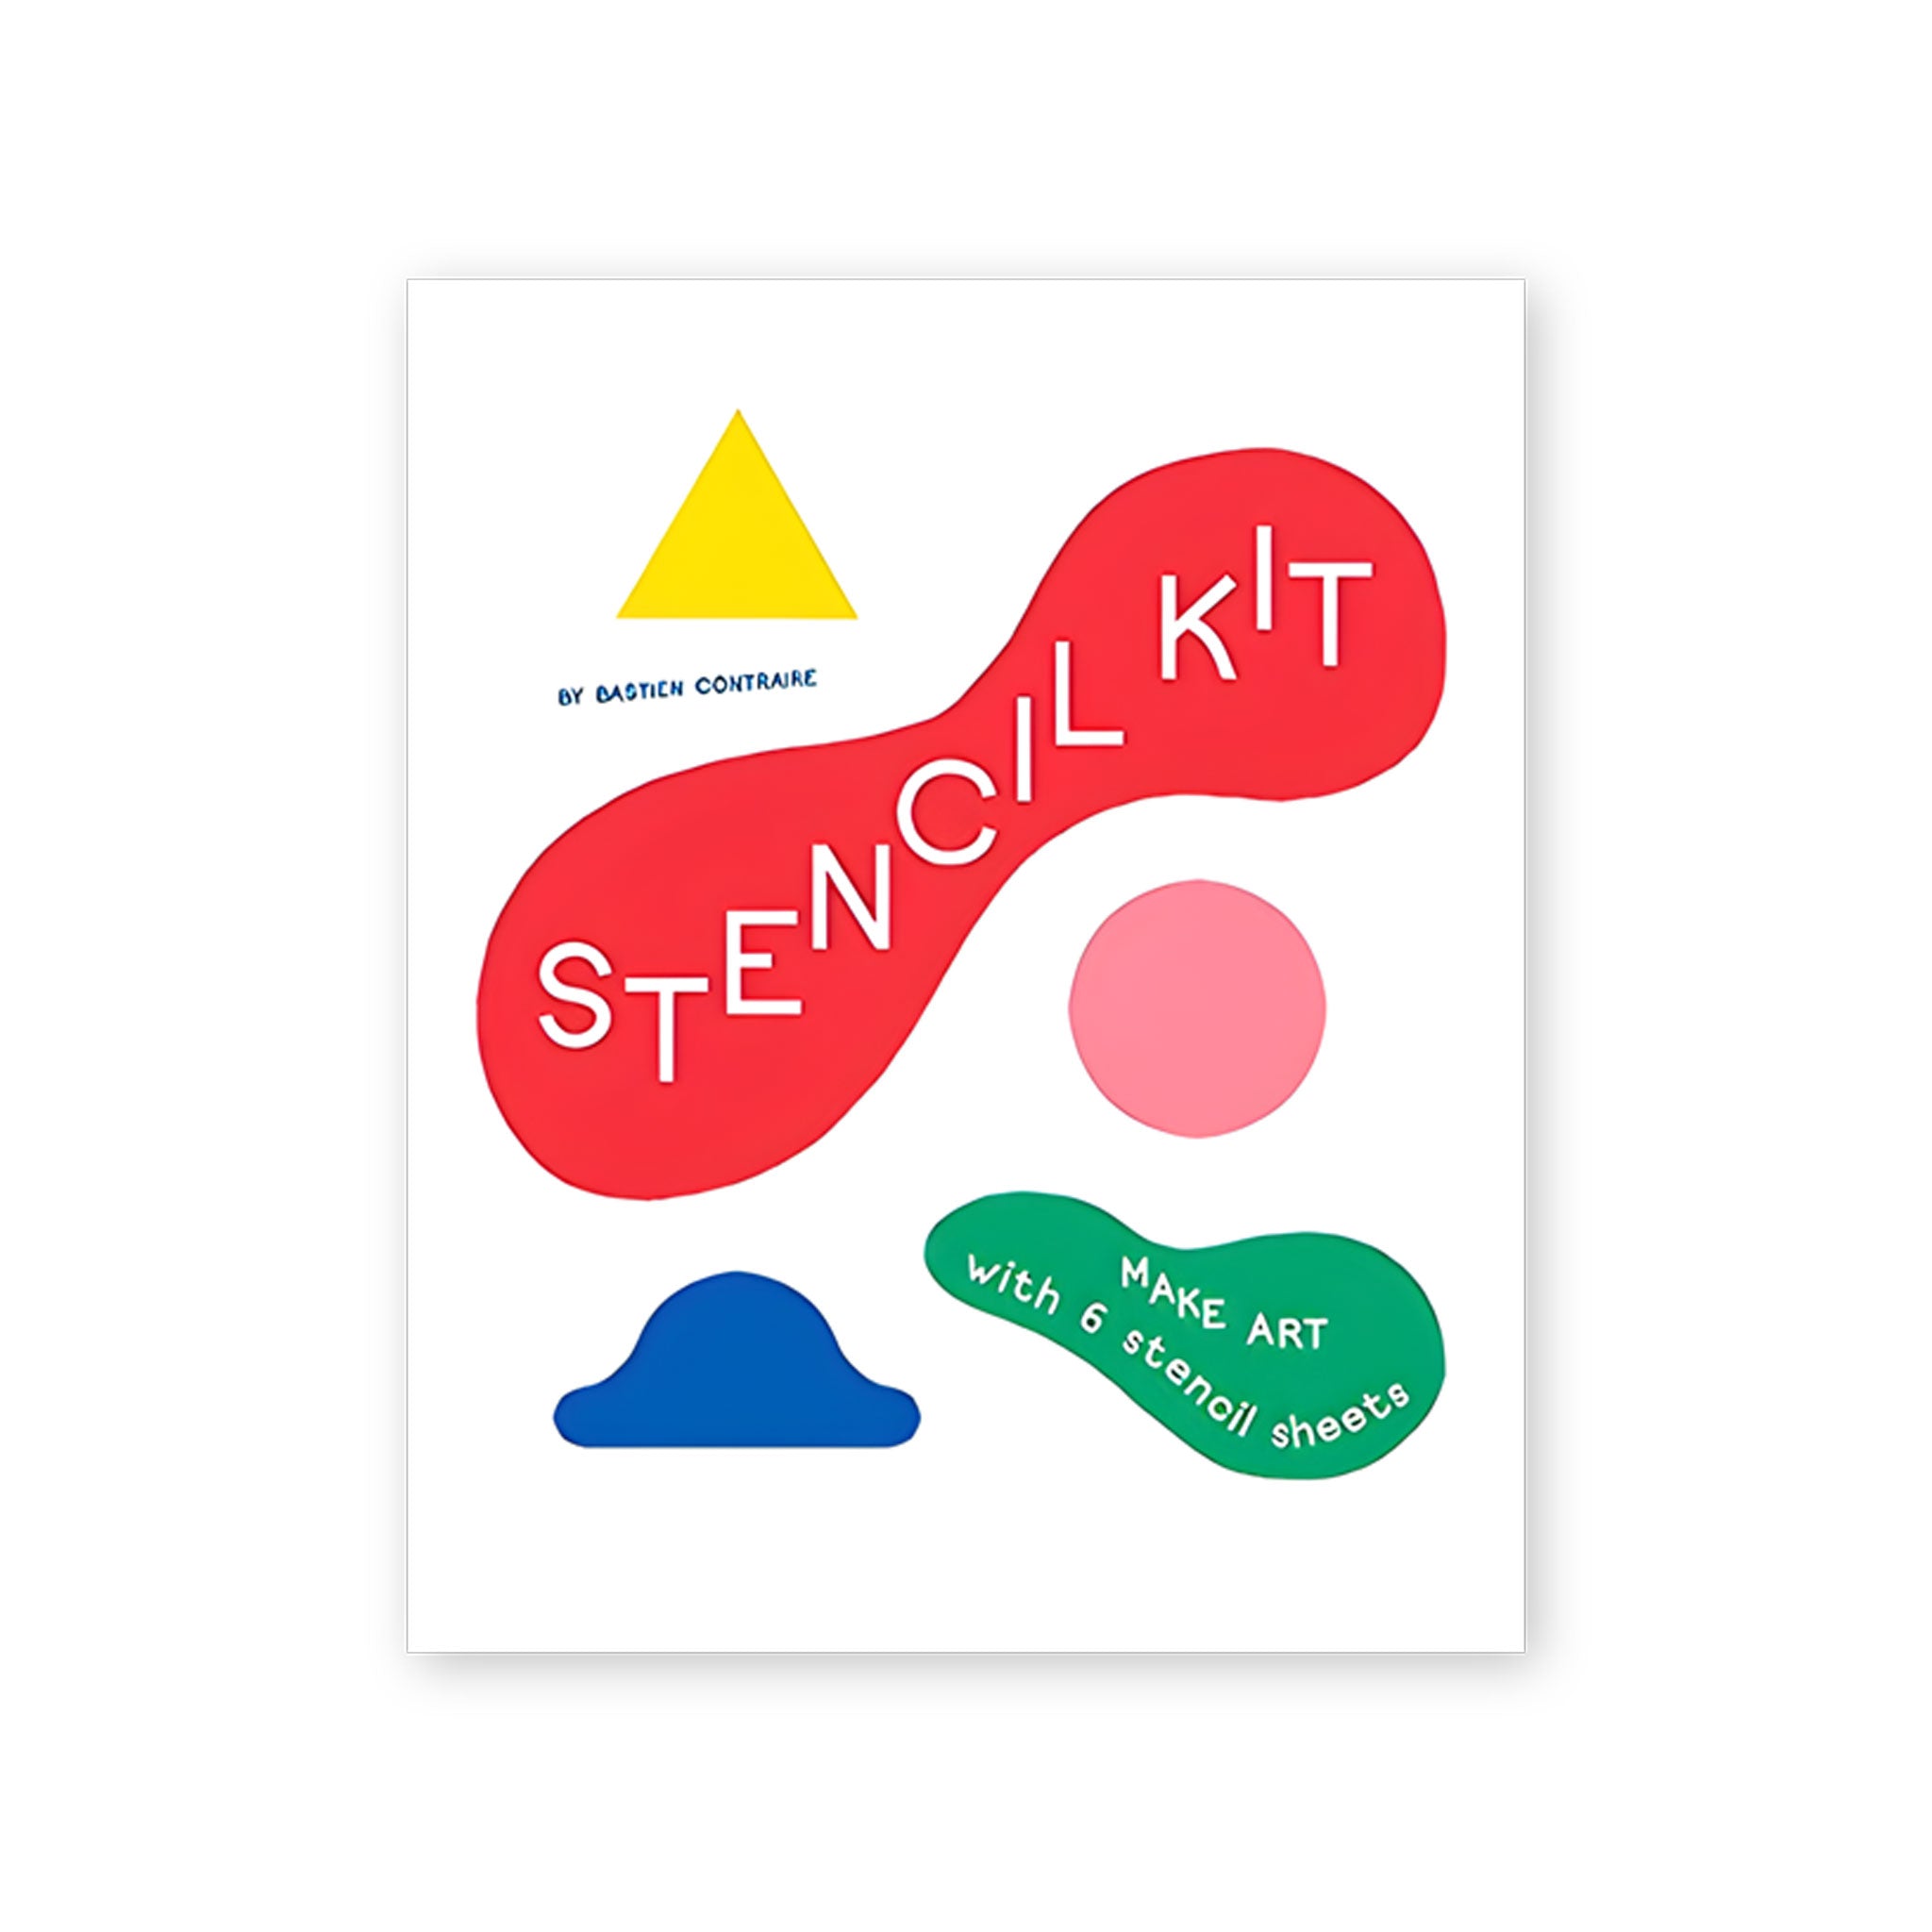 A frontal view of the cover of the book. There are several brightly colored simple shapes on a white background, and in the shapes reads the text "STENCIL KIT: MAKE ART with 6 stencil sheets"